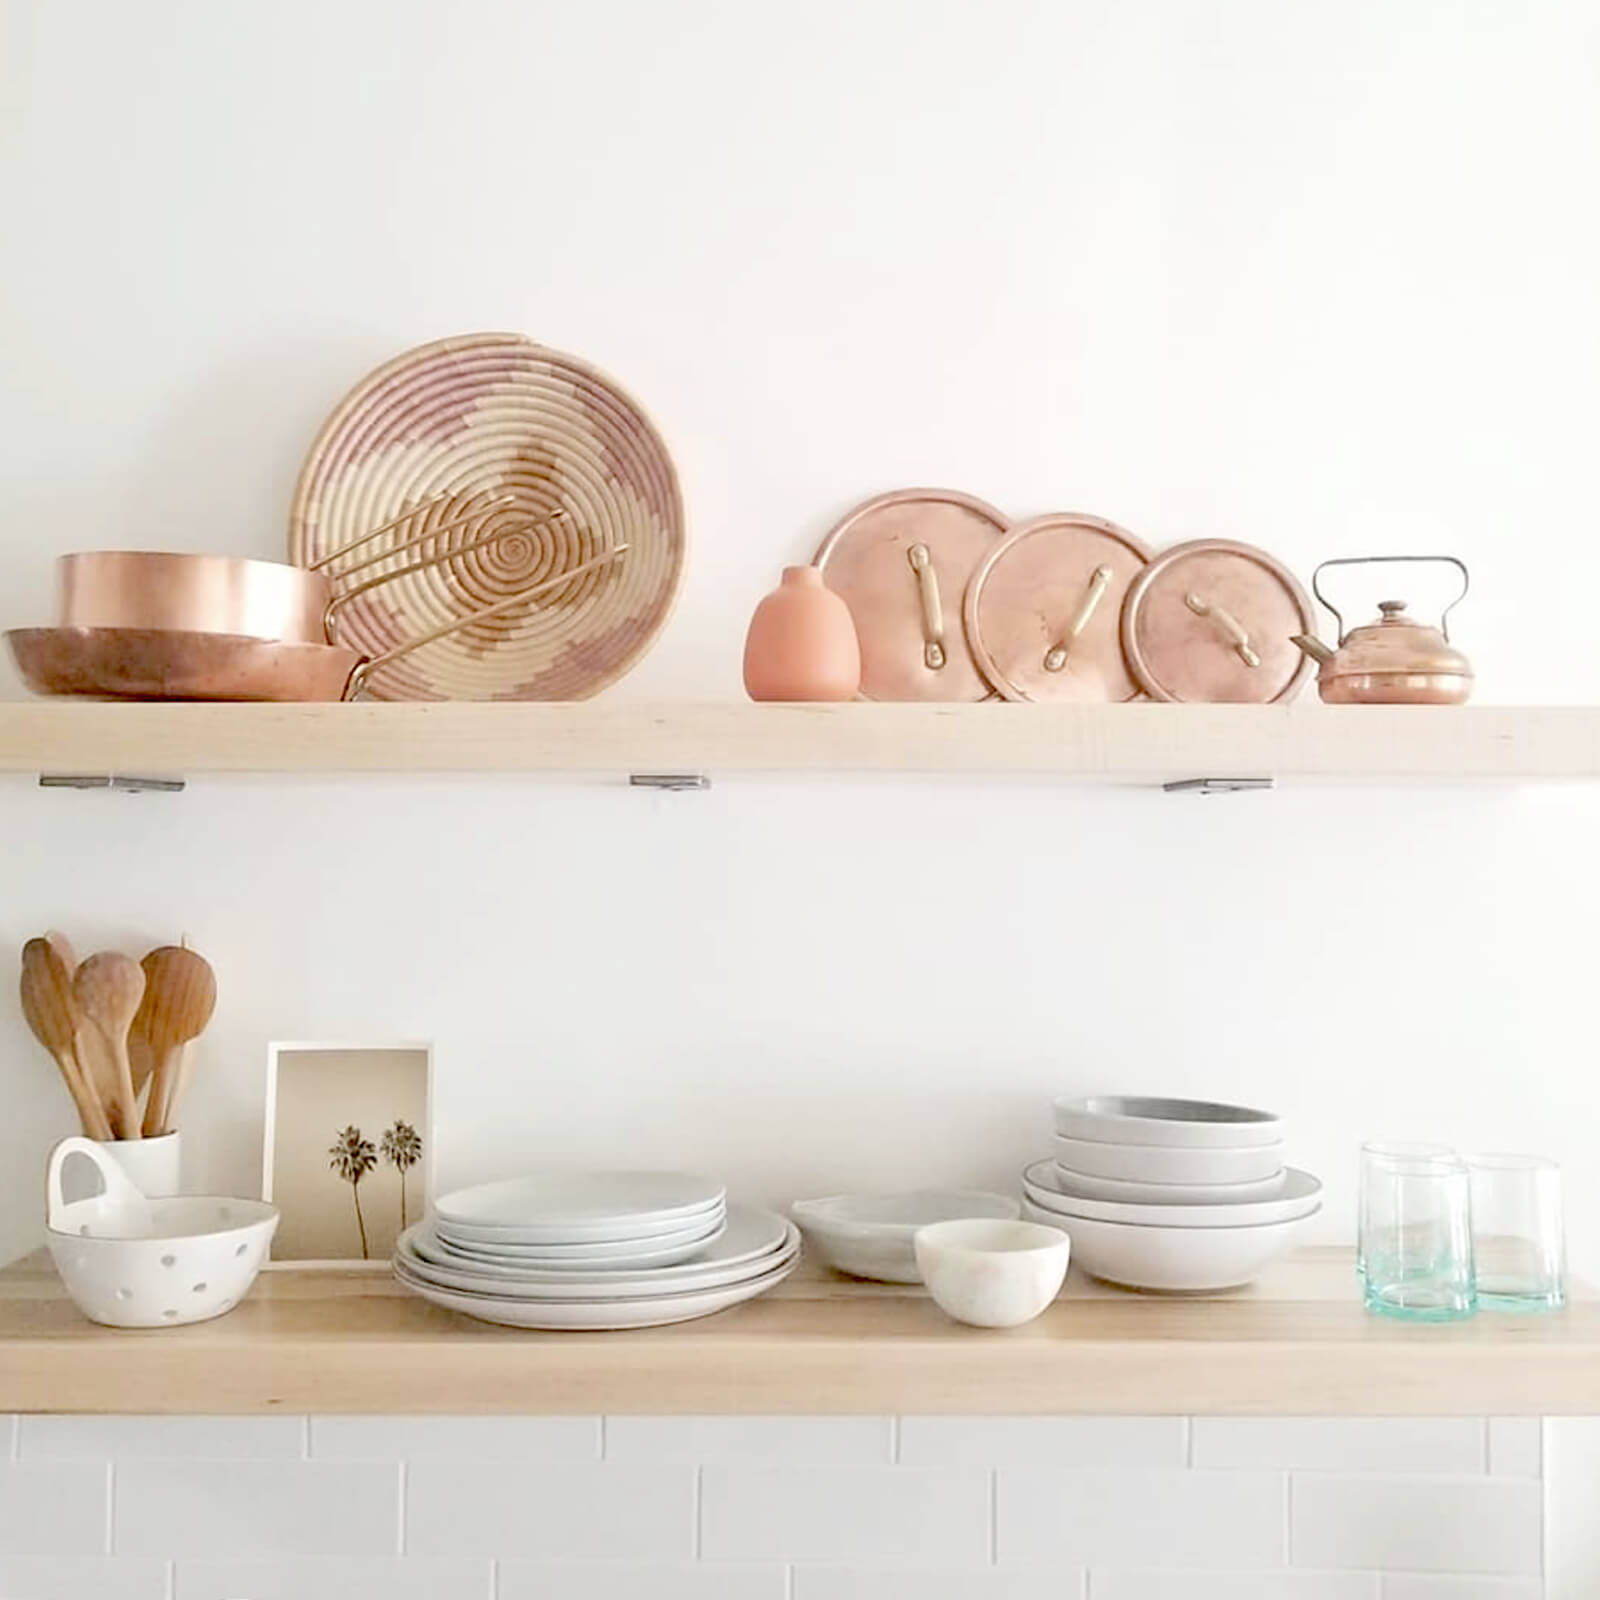 Open kitchen shelves, styled with copper pots and Moroccan recycled glass cocktail glasses 